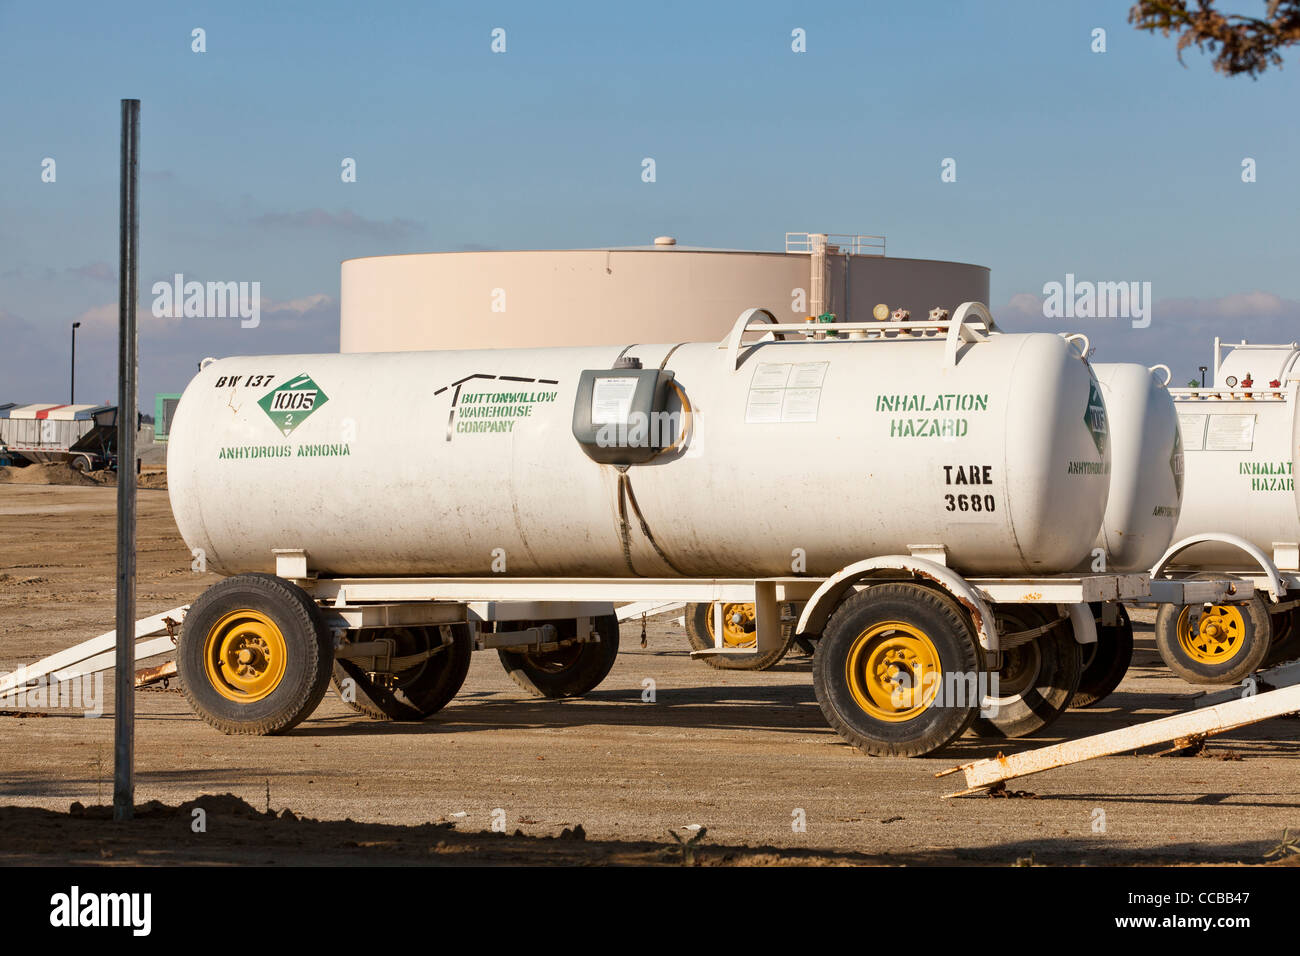 Anhydrous Ammonia in tanks for fertilizer use Stock Photo